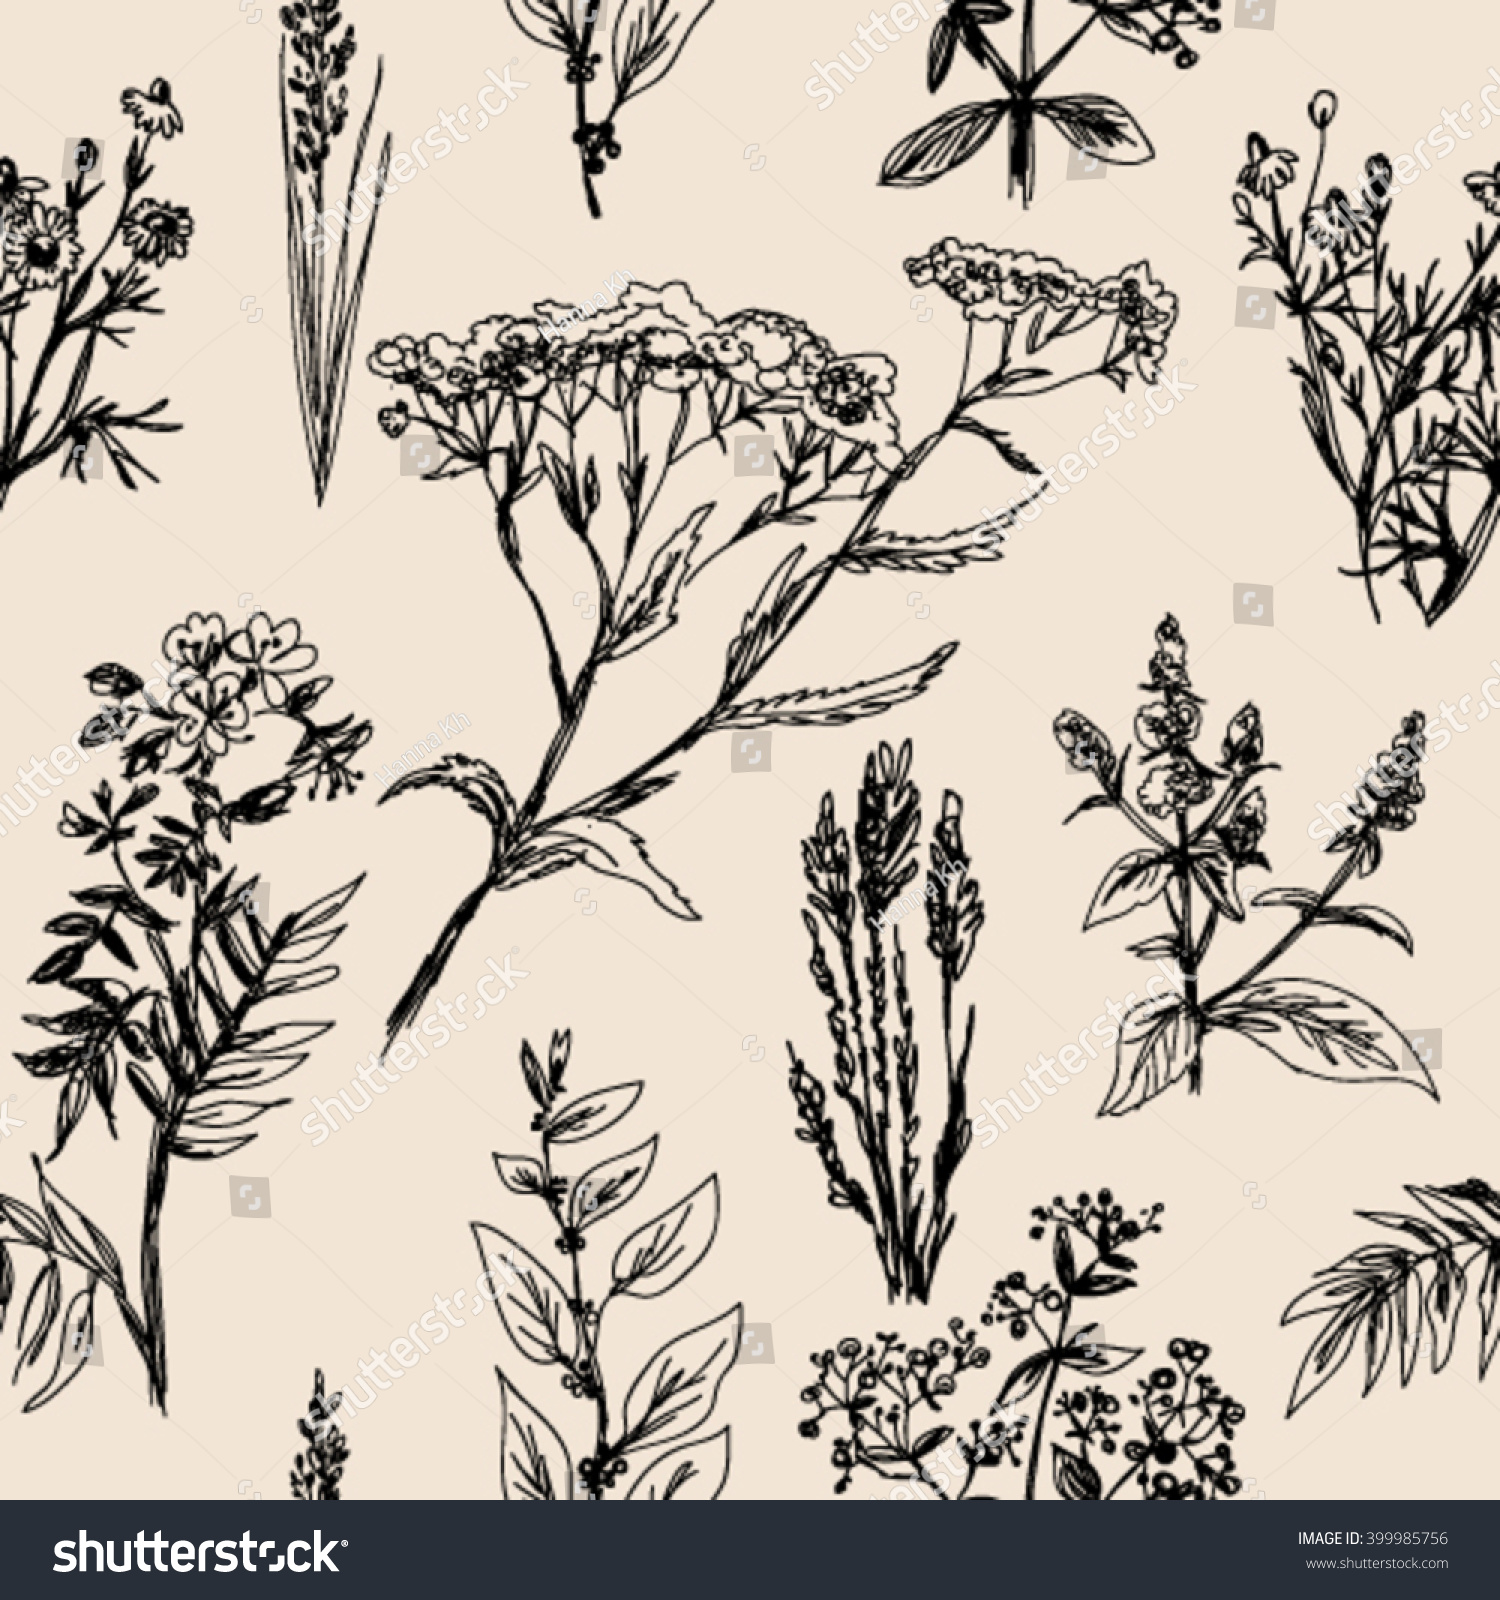 Vector Vintage Seamless Floral Pattern. Herbs And Wild Flowers ...